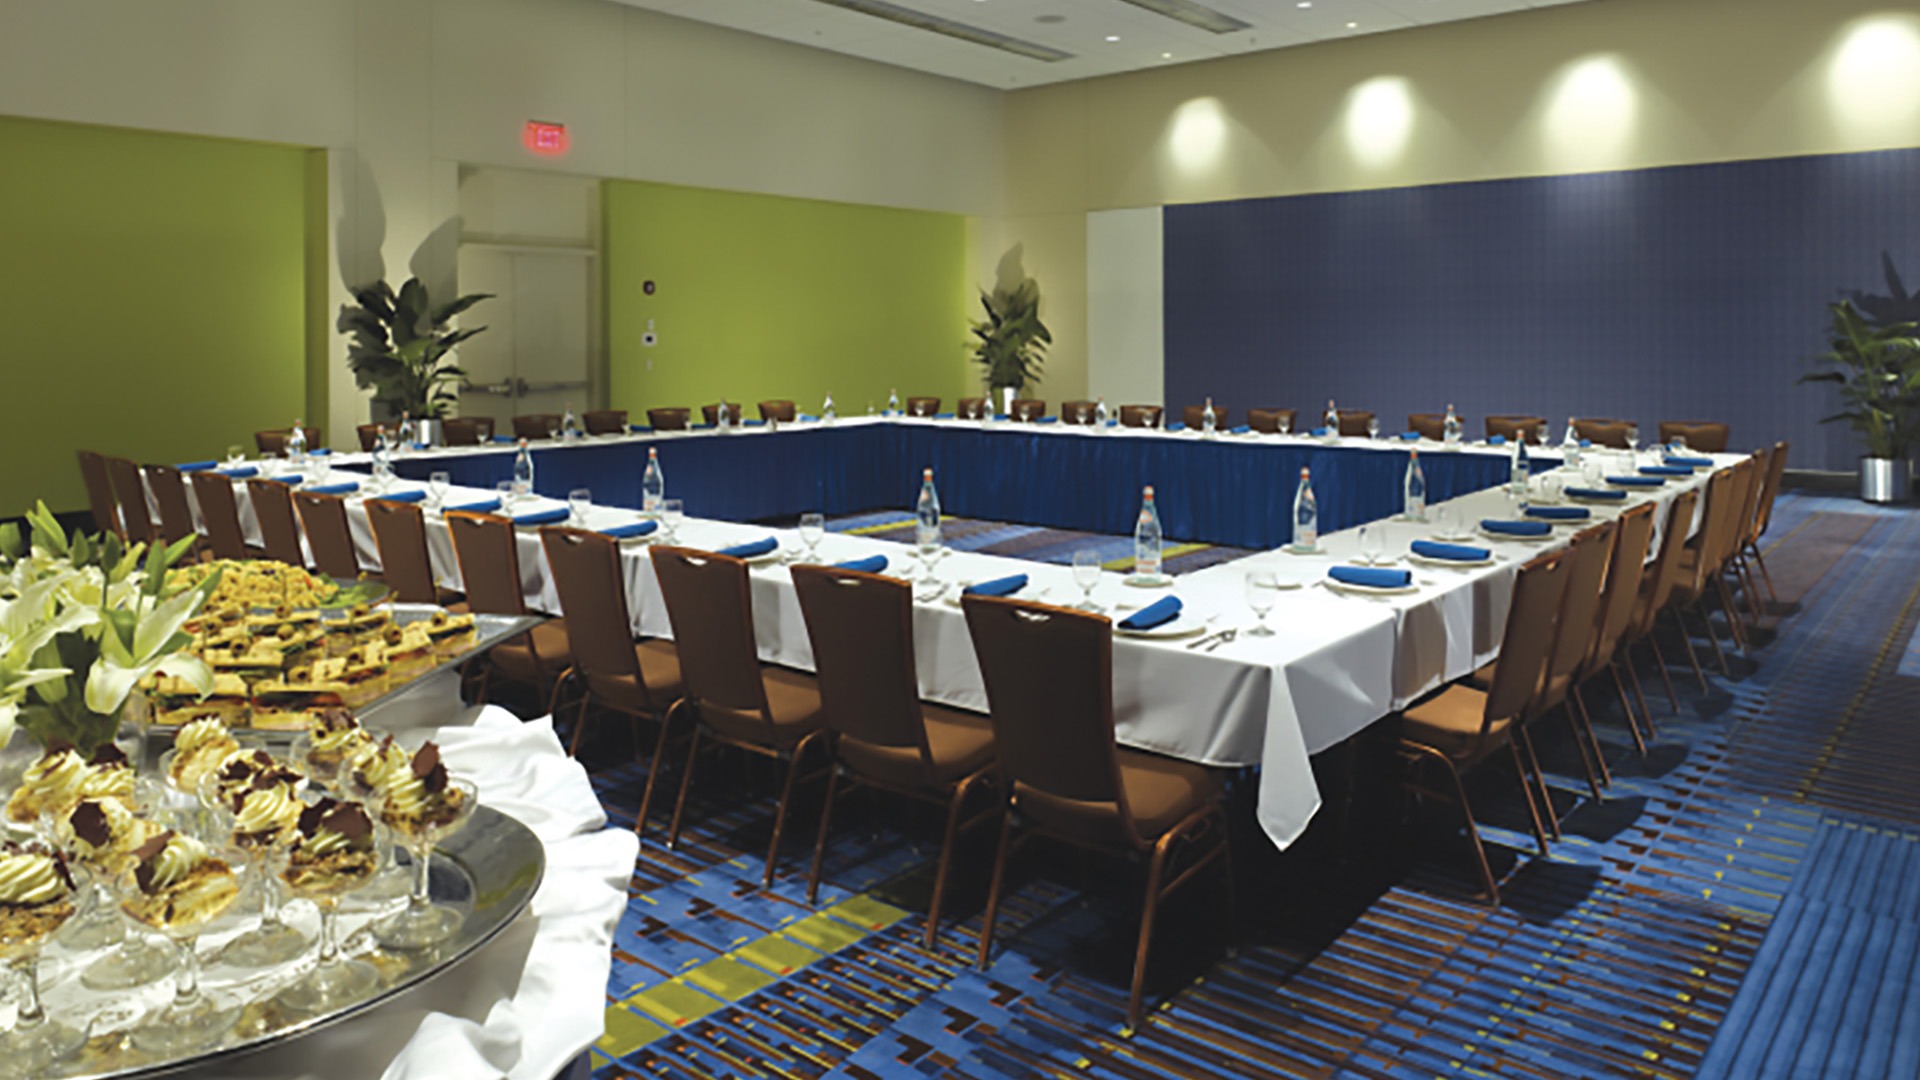 The boardroom at Ocean Center. The walls and carpet are green and blue. Chairs are arranged around a large square table. A dessert table is in front of the table.